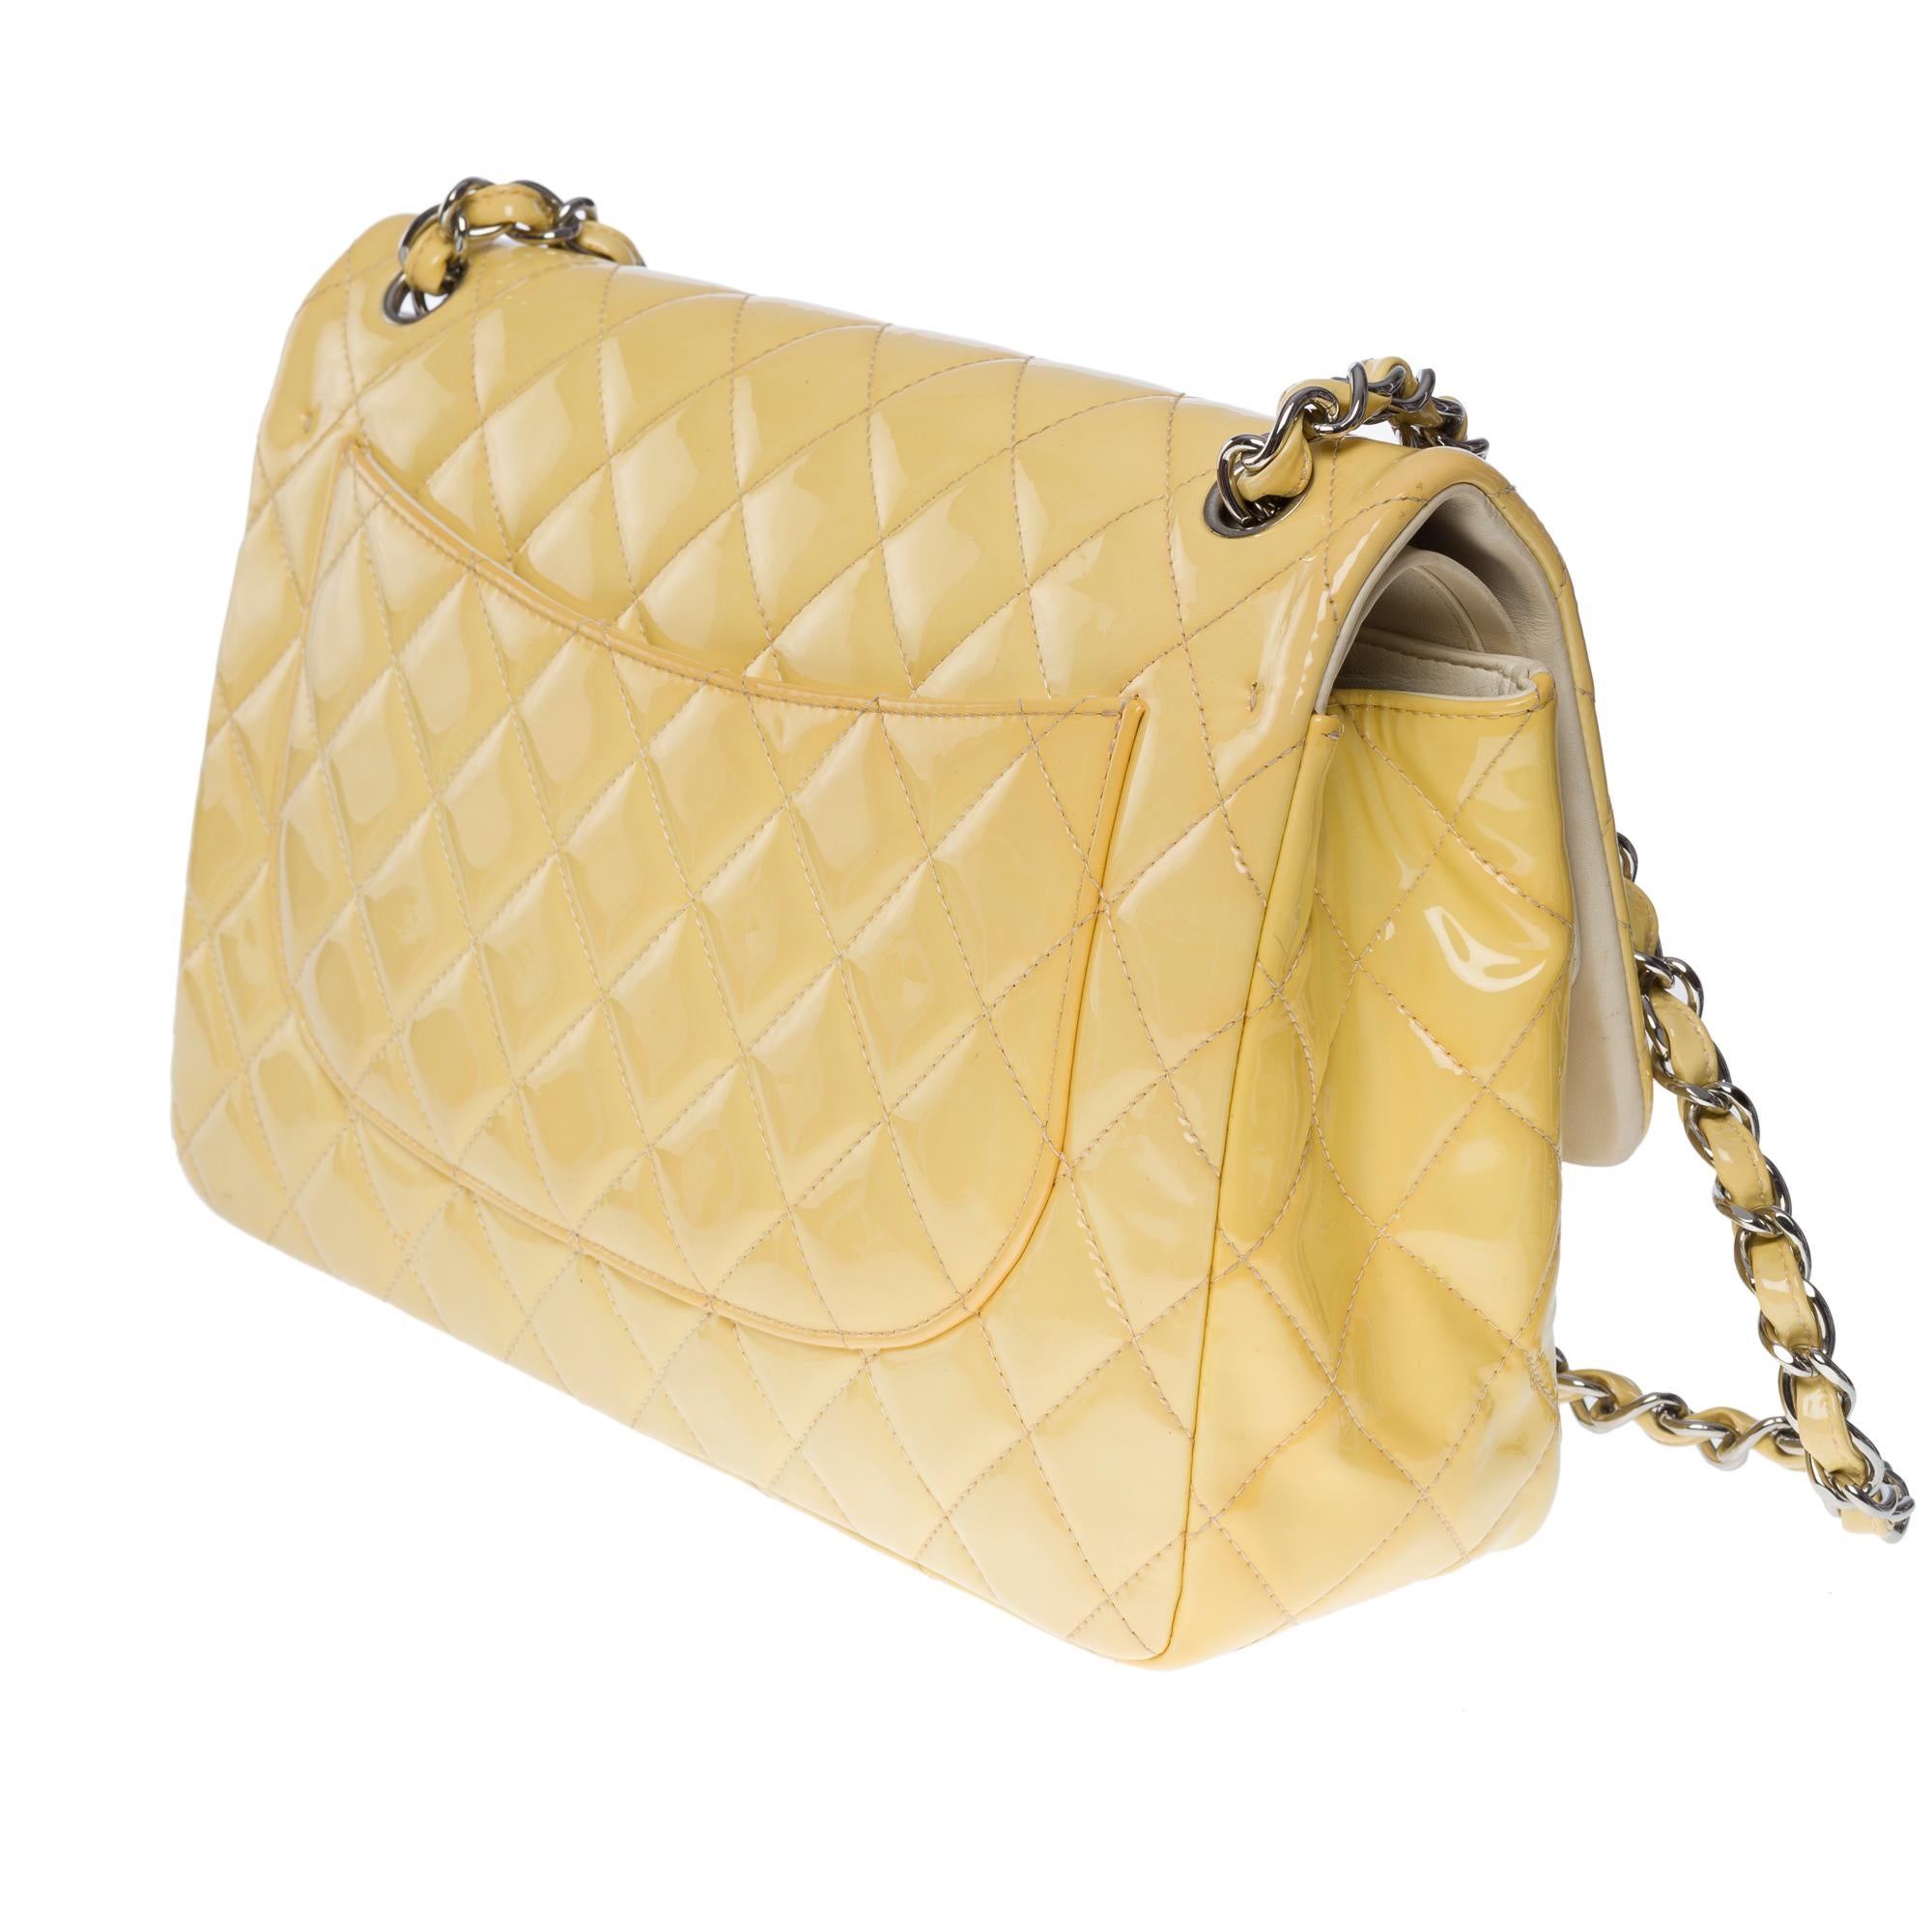 Women's Chanel Timeless Jumbo double flap shoulder bag in yellow patent leather, SHW